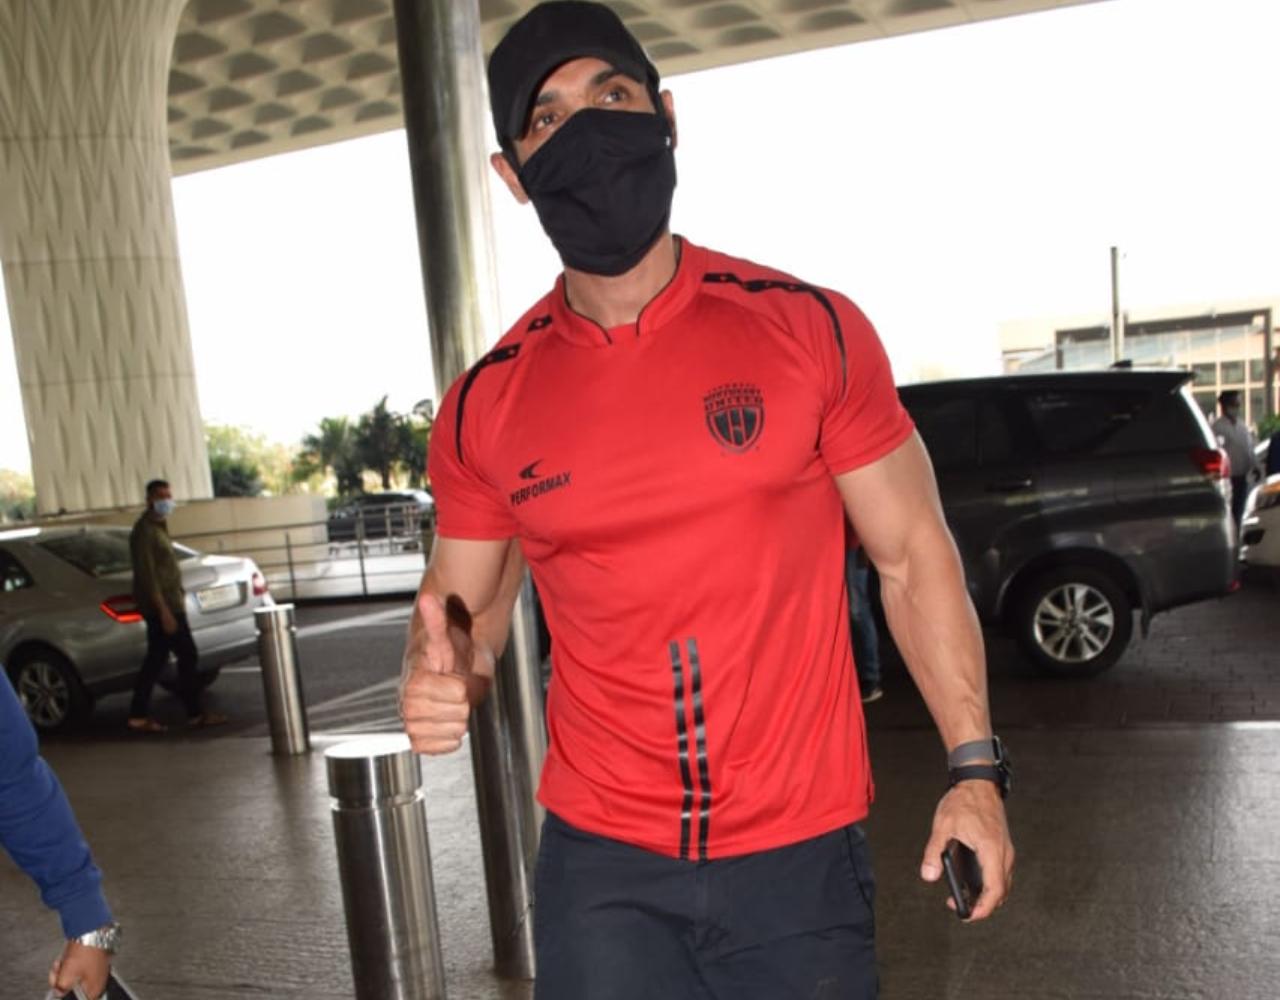 John Abraham, who will be next seen in Satyamev Jayate 2 was also clicked at the airport.